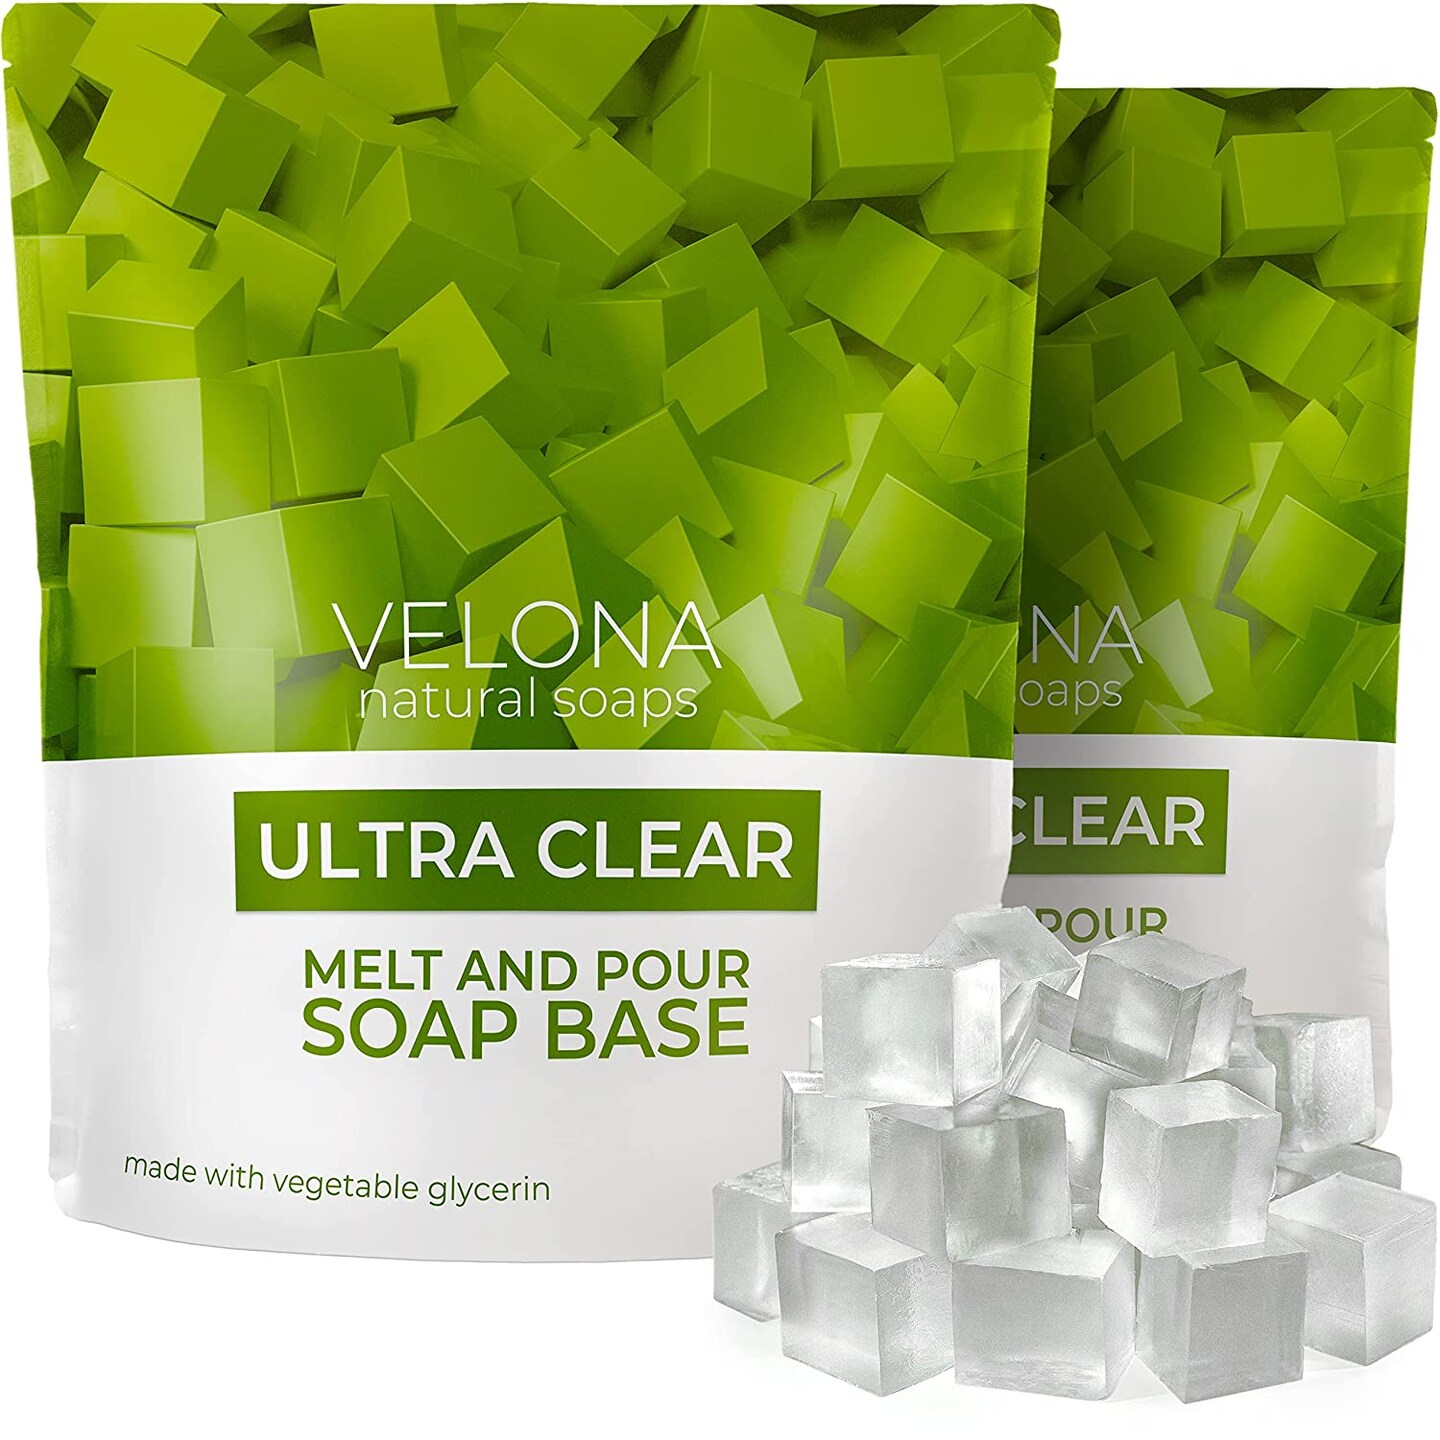 4 LB - Ultra Clear Glycerin Soap Base by Velona | Pre-Cut Cubes | SLS/SLES Free | Melt and Pour | Transparent Natural Bars for The Best Result for Soap-Making